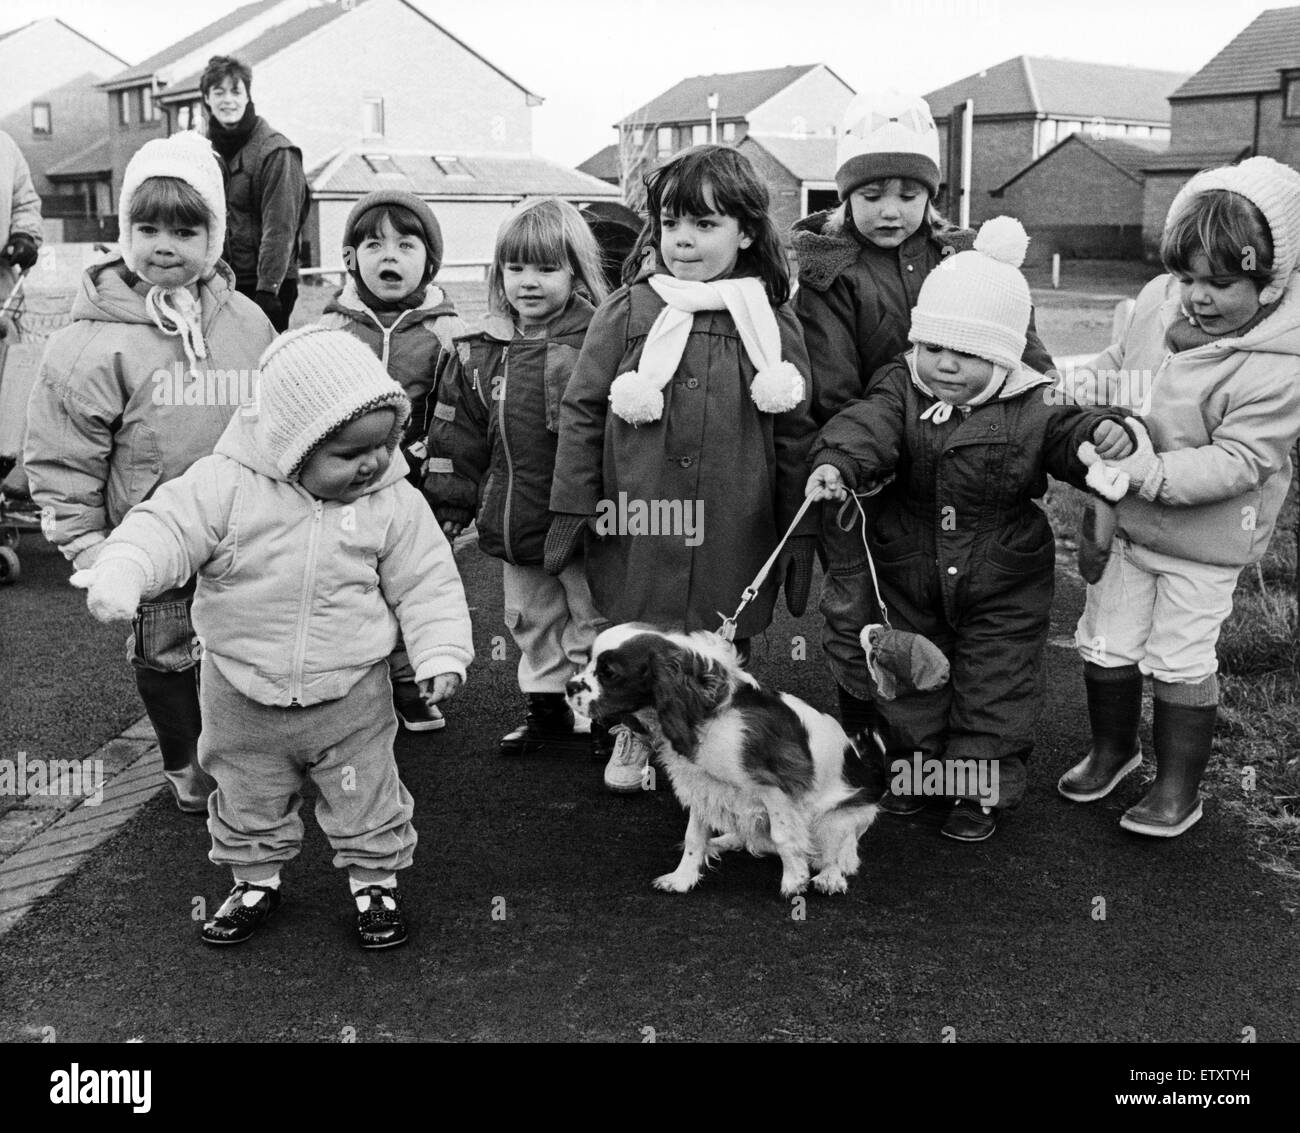 These toddlers took their first steps in fundraising in a bid to raise cash for a growing estate's  new playgroup. Ingleby Barwick, 11th February 1987. Stock Photo